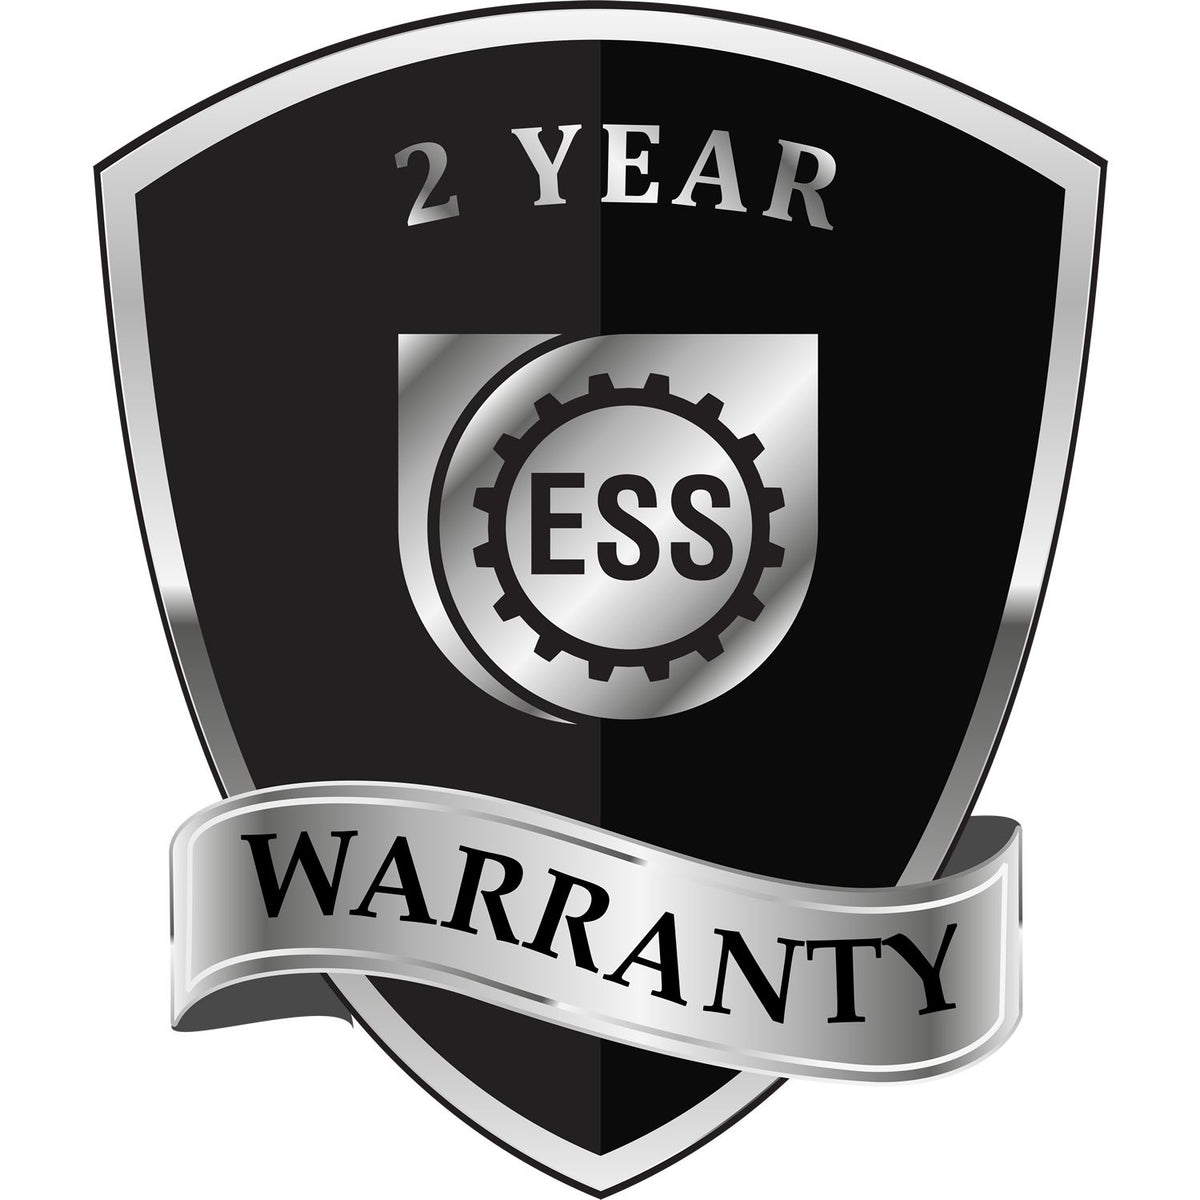 A black and silver badge or emblem showing warranty information for the Hybrid Virginia Architect Seal